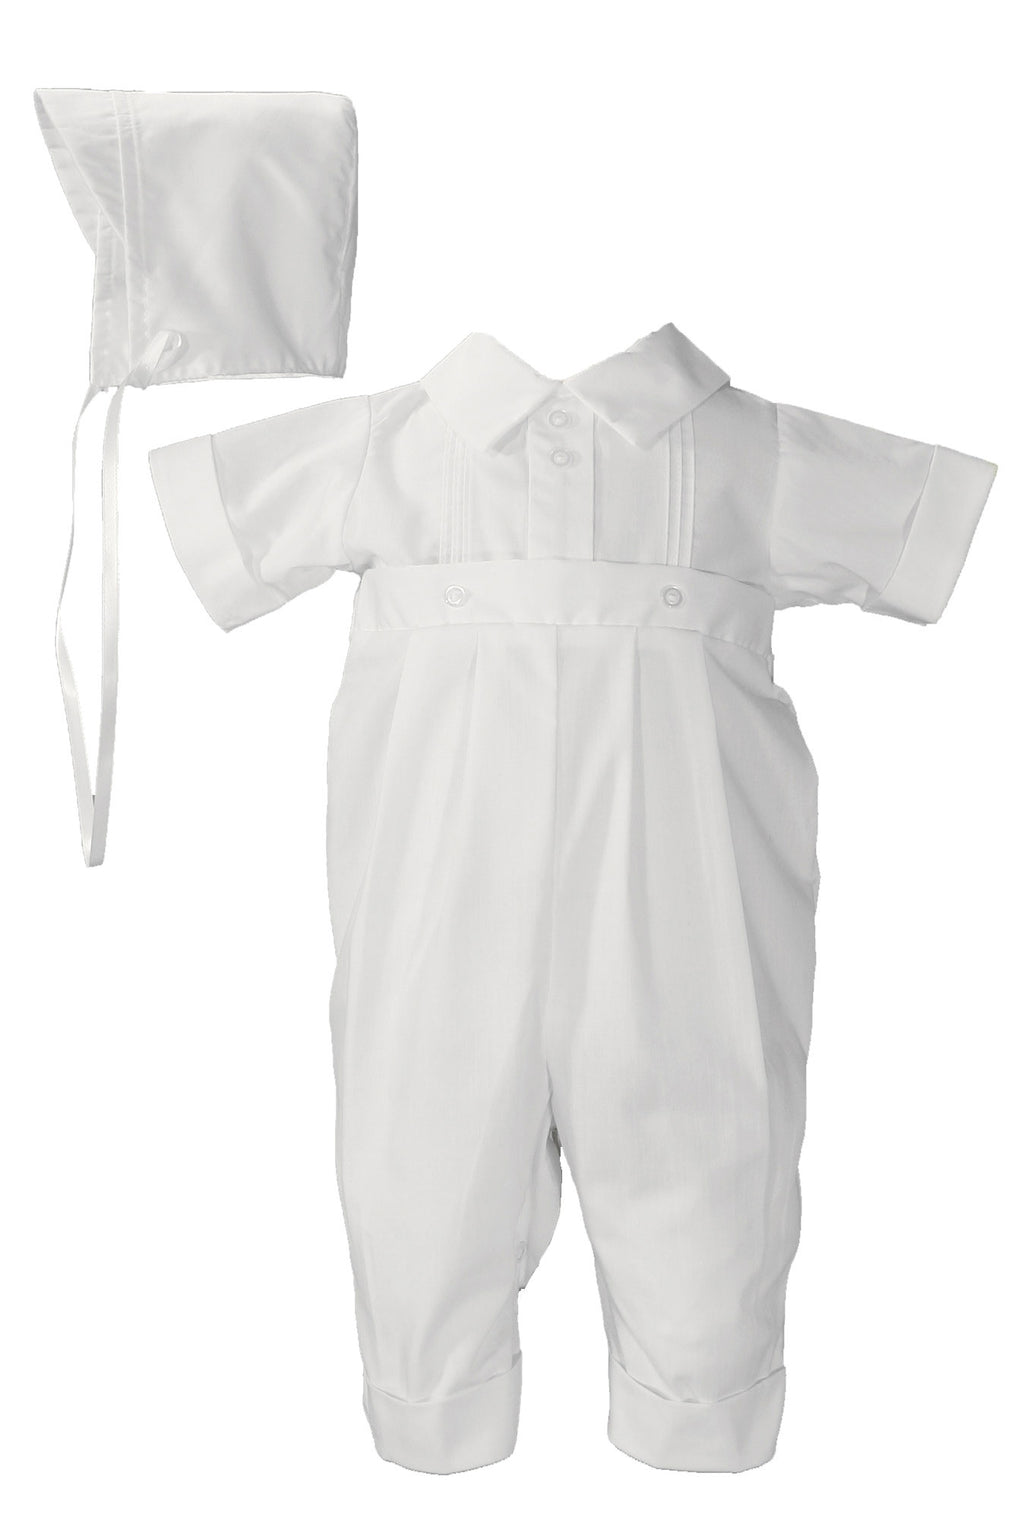 Boys Poly Cotton One Piece Christening Baptism Coverall with Pin Tucking (12 Months) BJ01CS12